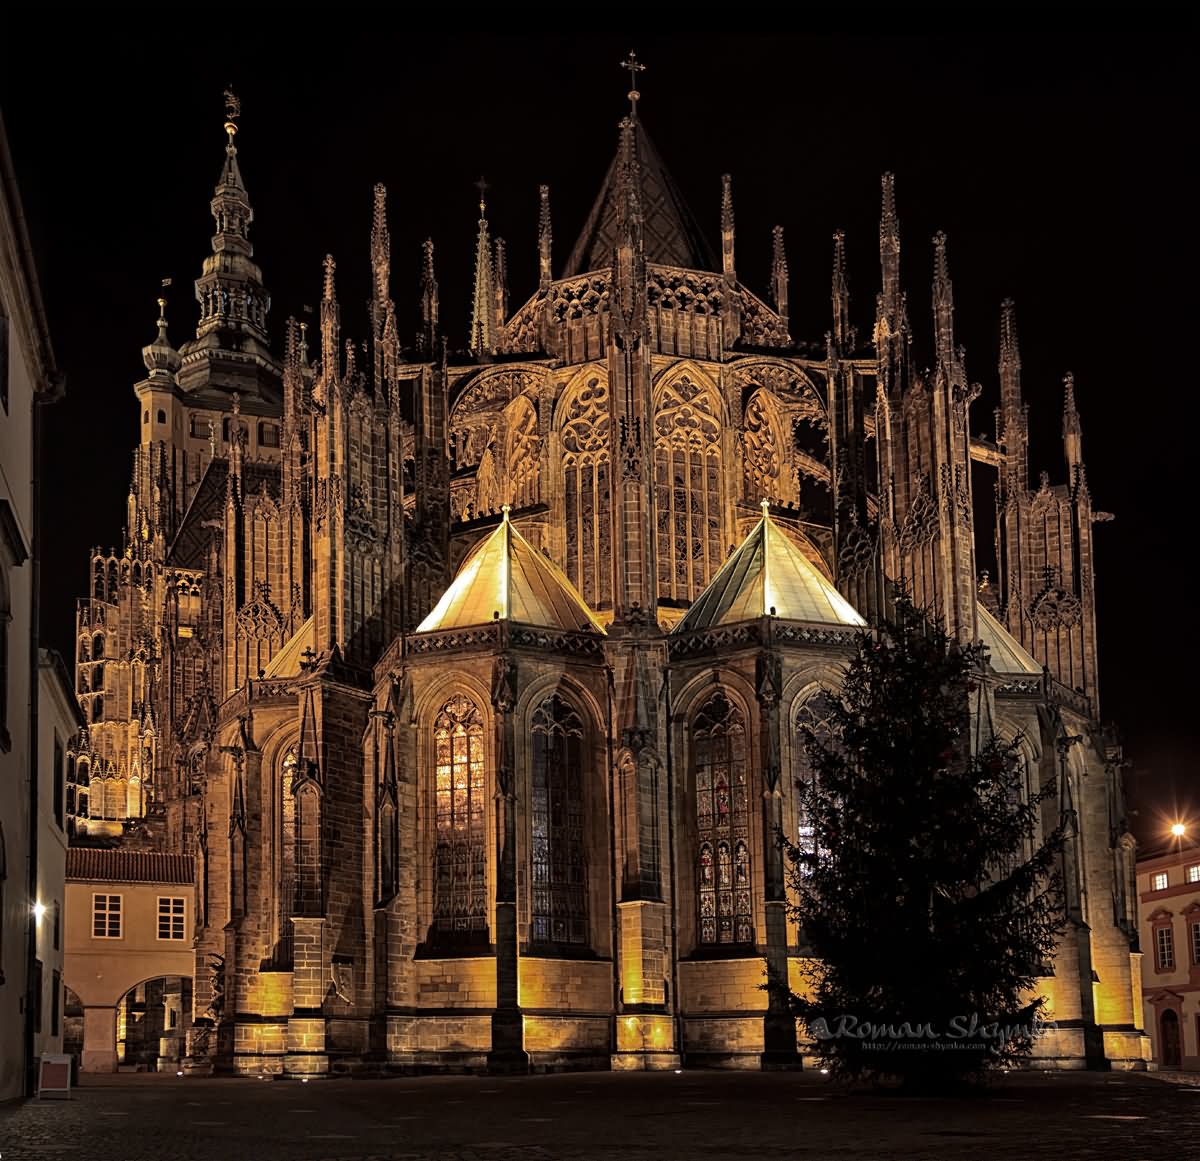 Incredible Night Picture Of The St. Vitus Cathedral's Back